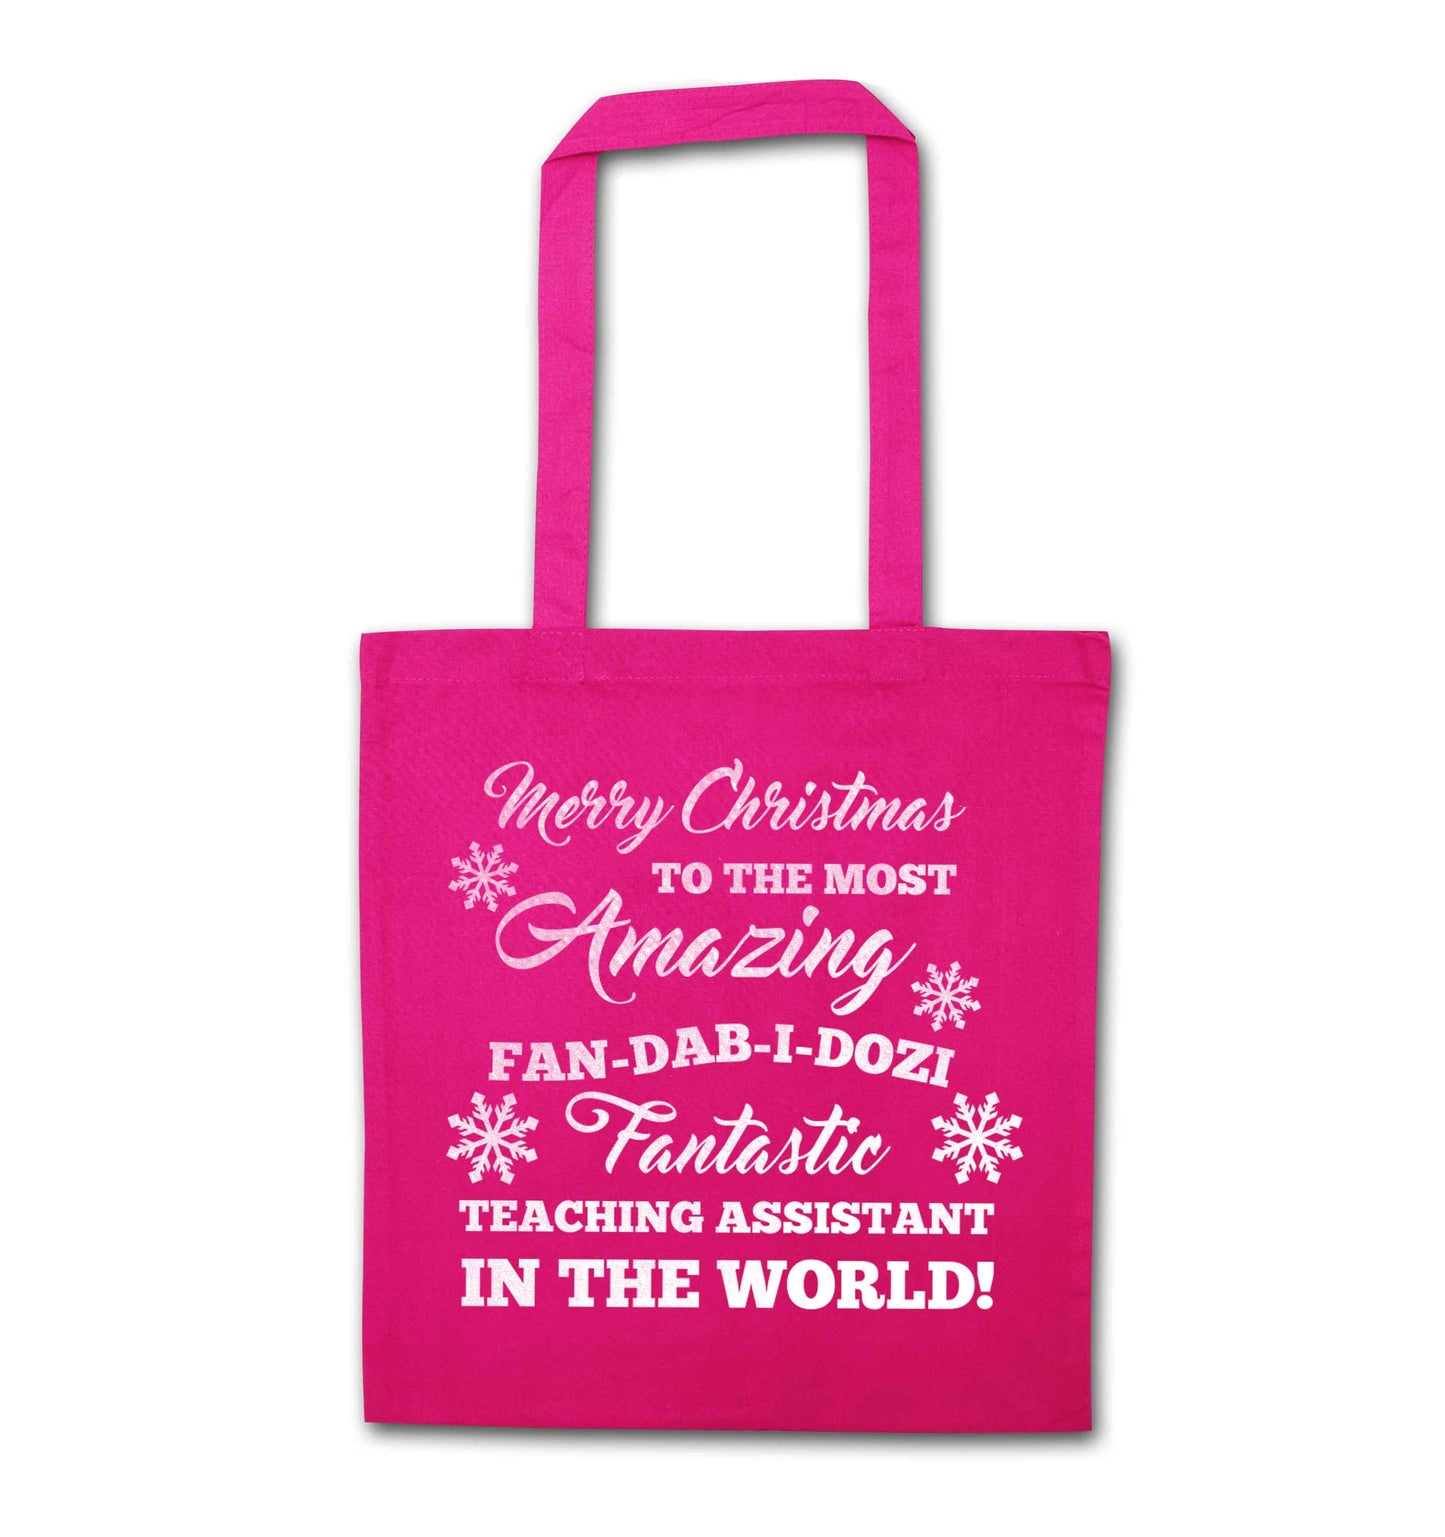 Merry Christmas to the most amazing fan-dab-i-dozi fantasic teaching assistant in the world pink tote bag